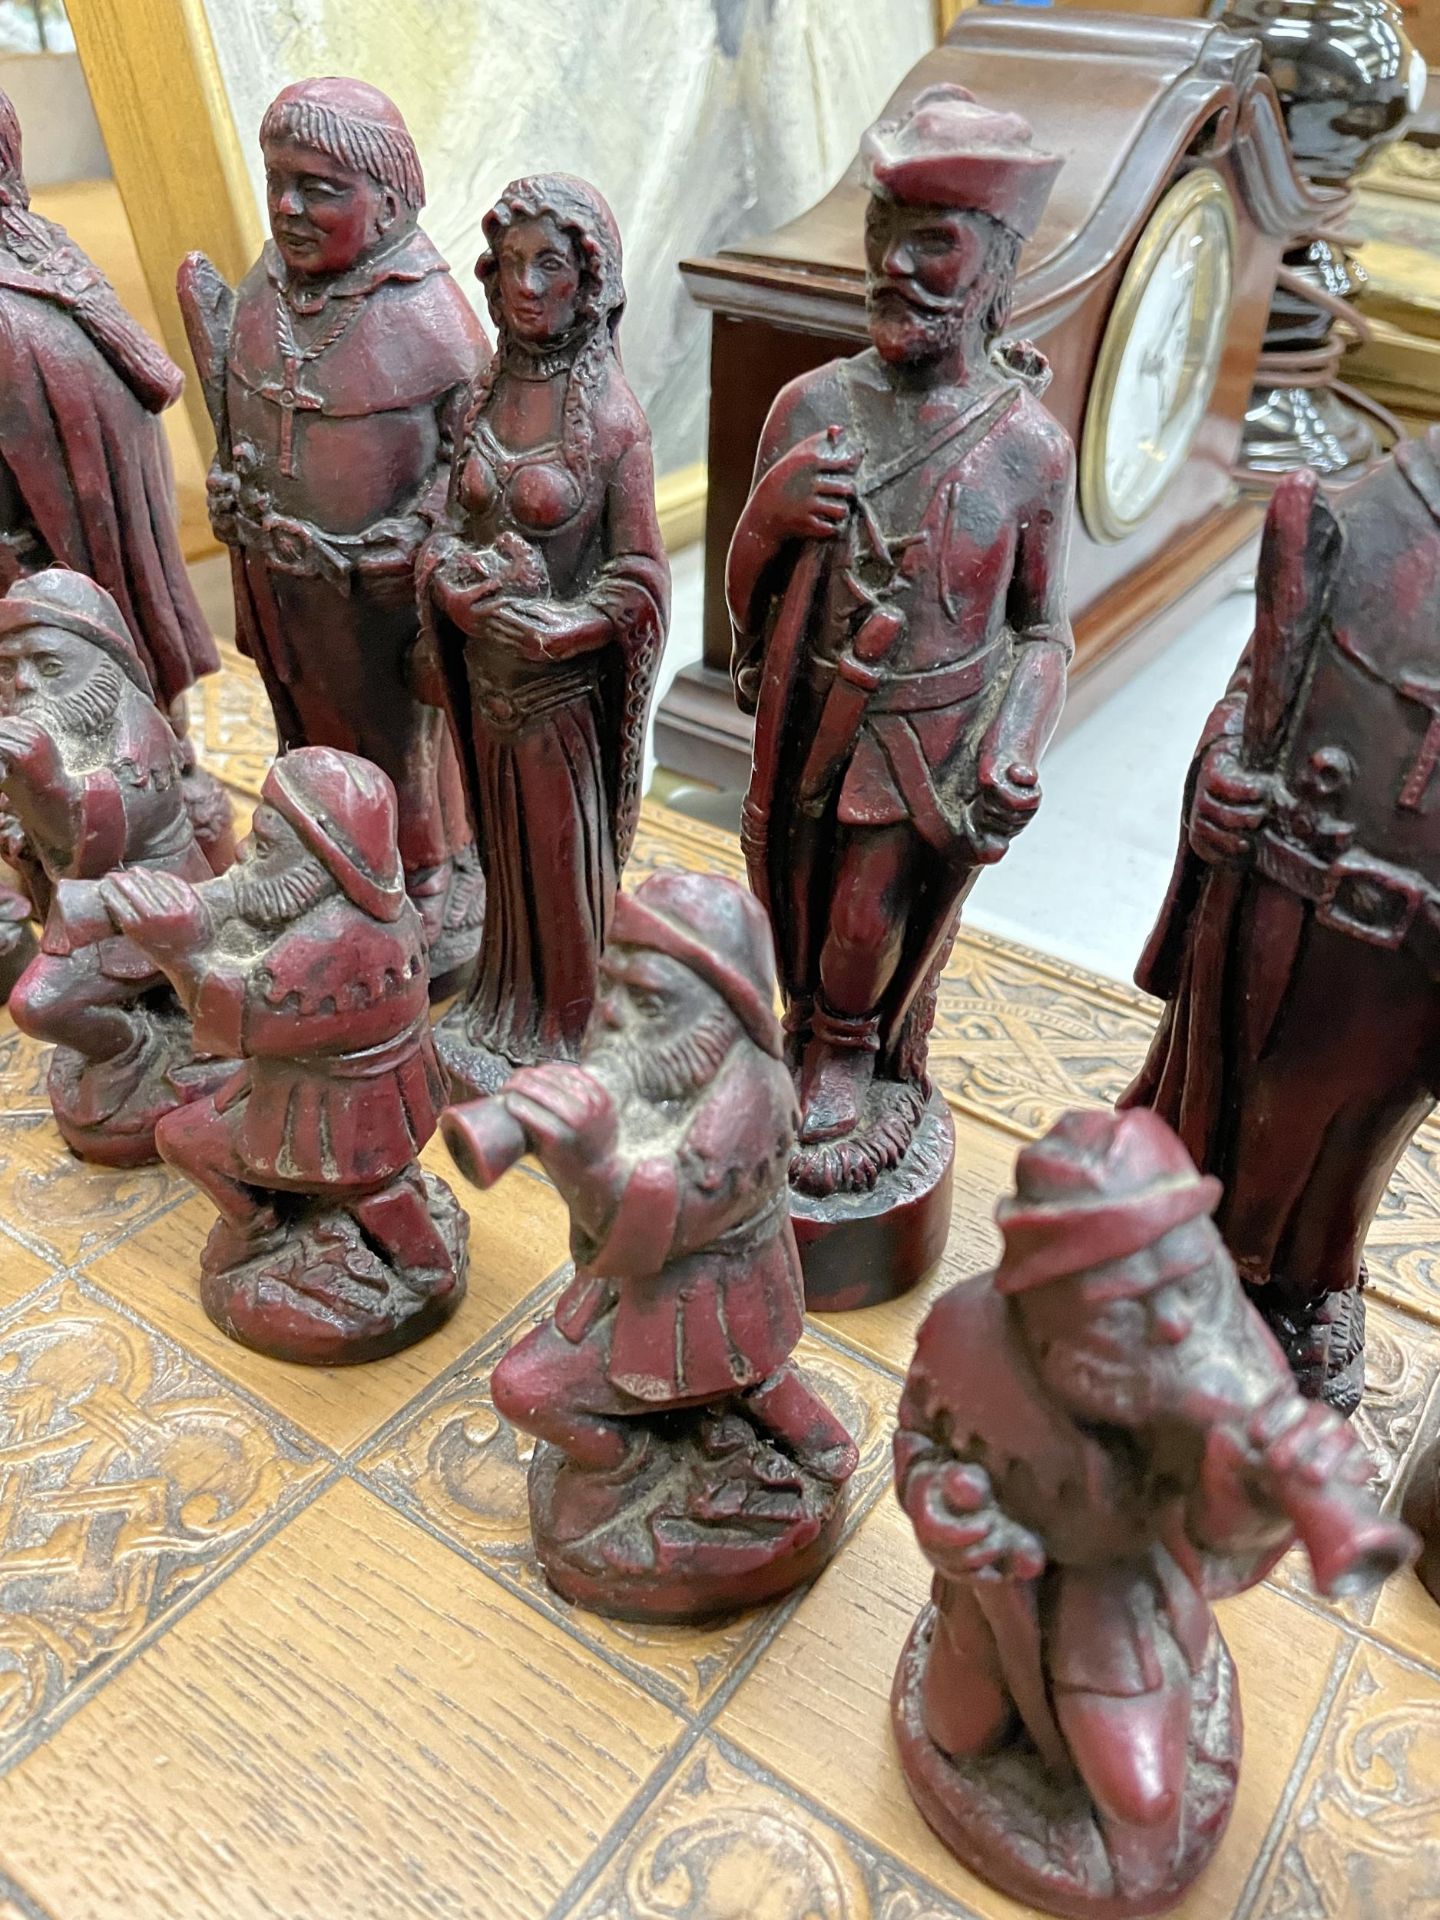 A VERY LARGE AND COMPLETE ROBIN HOOD RESIN CHESS SET WITH PIECES UP TO AND OVER 15CM TALL, - Image 6 of 7